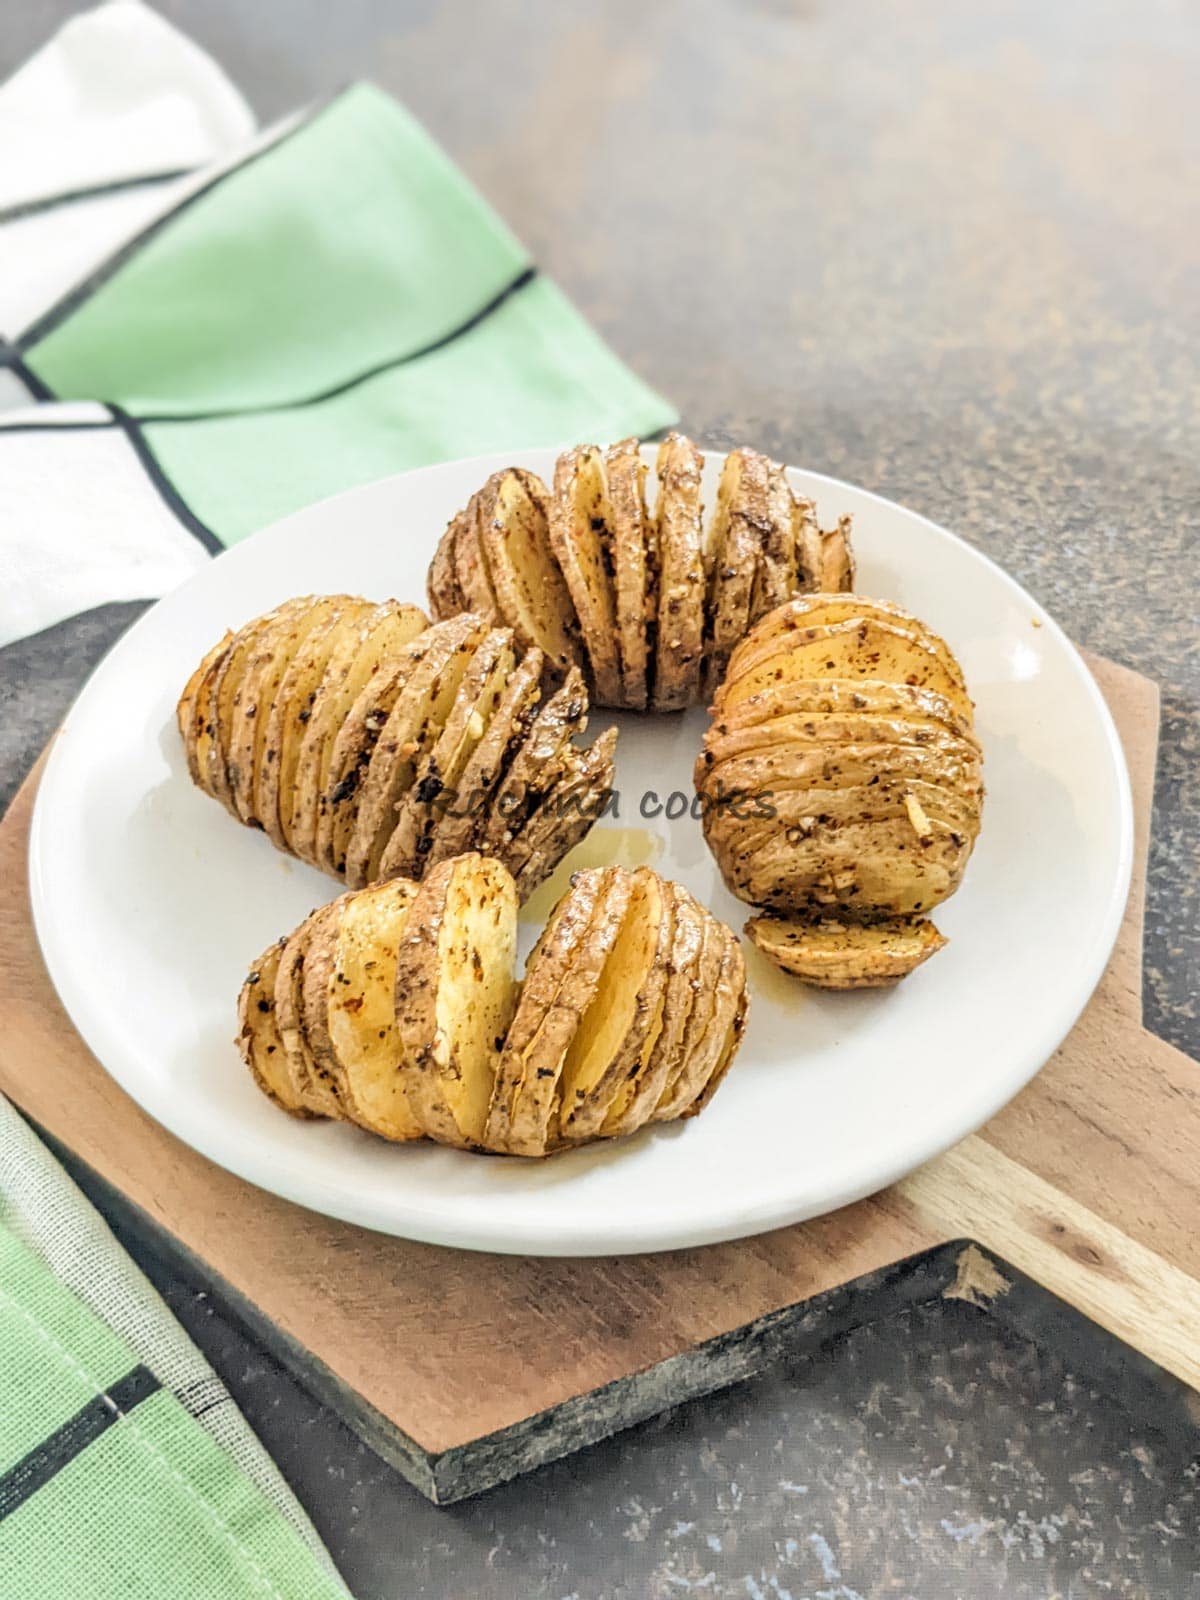 Four hasselback potatoes after air frying on a white plate with a green napkin on a brownish background.